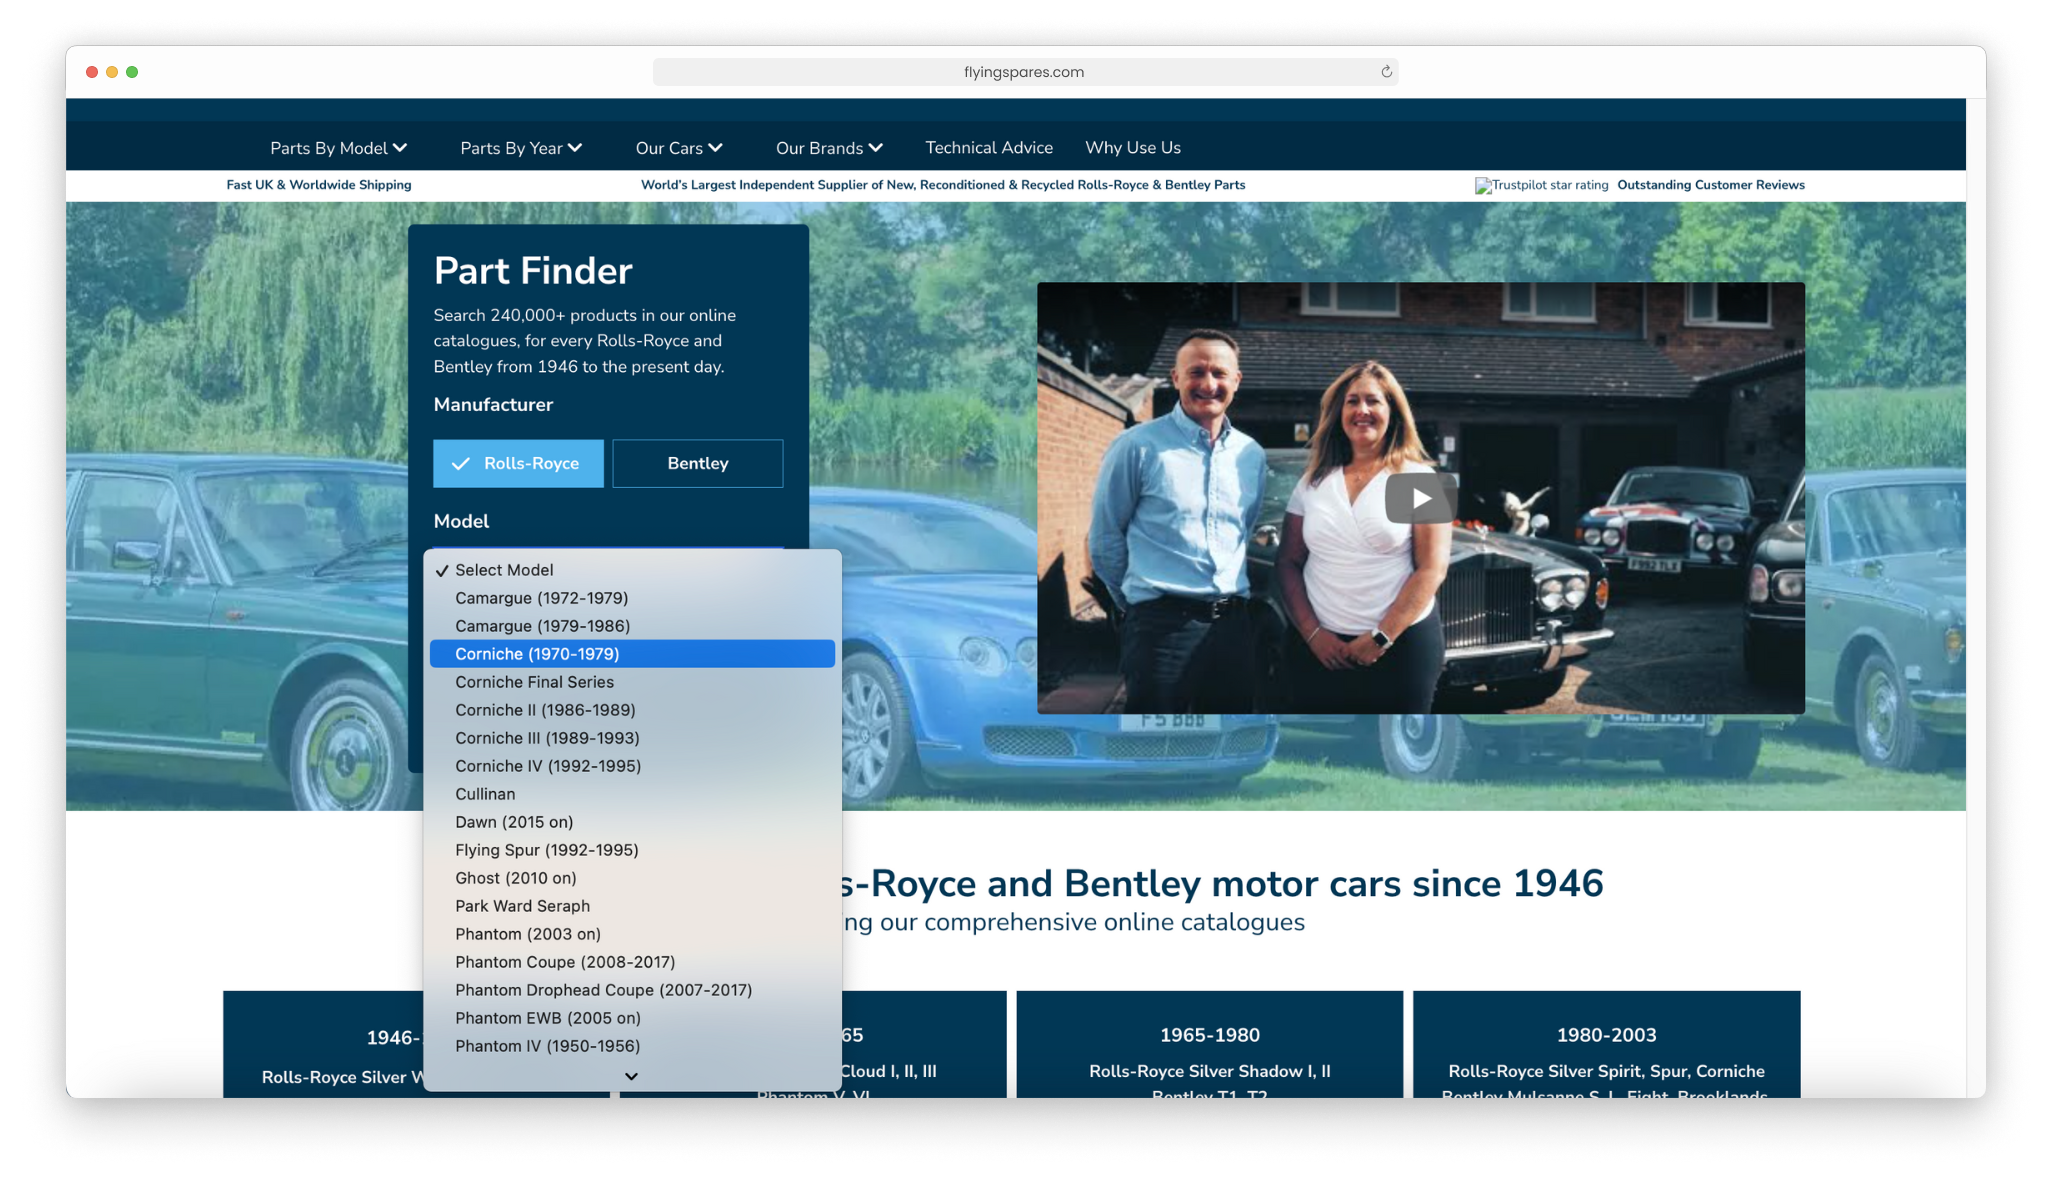 The part finder feature on the Flying Spares website, as developed by magic42 eCommerce agency